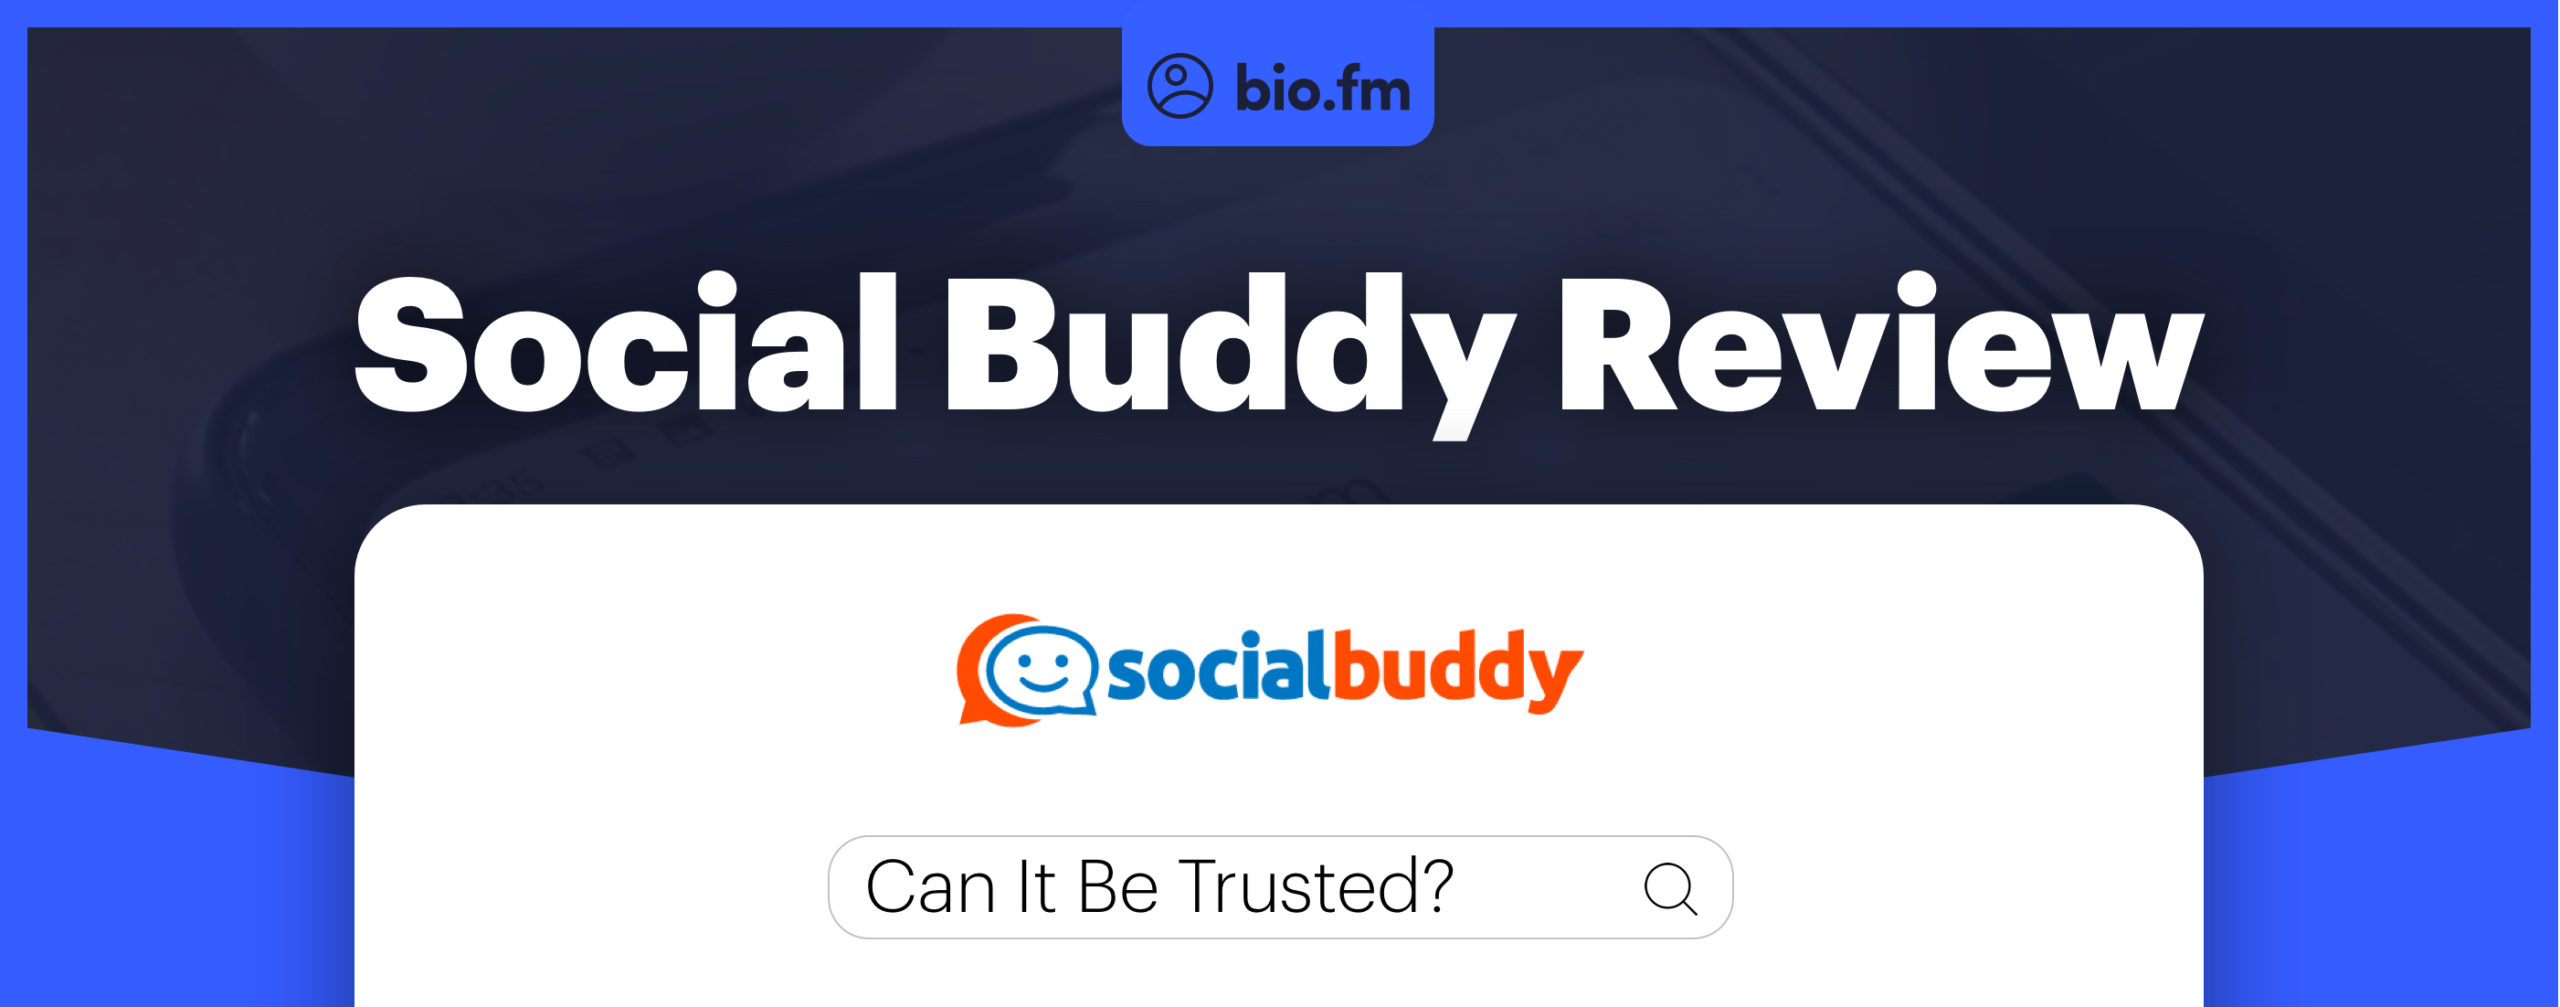 social buddy review featured image